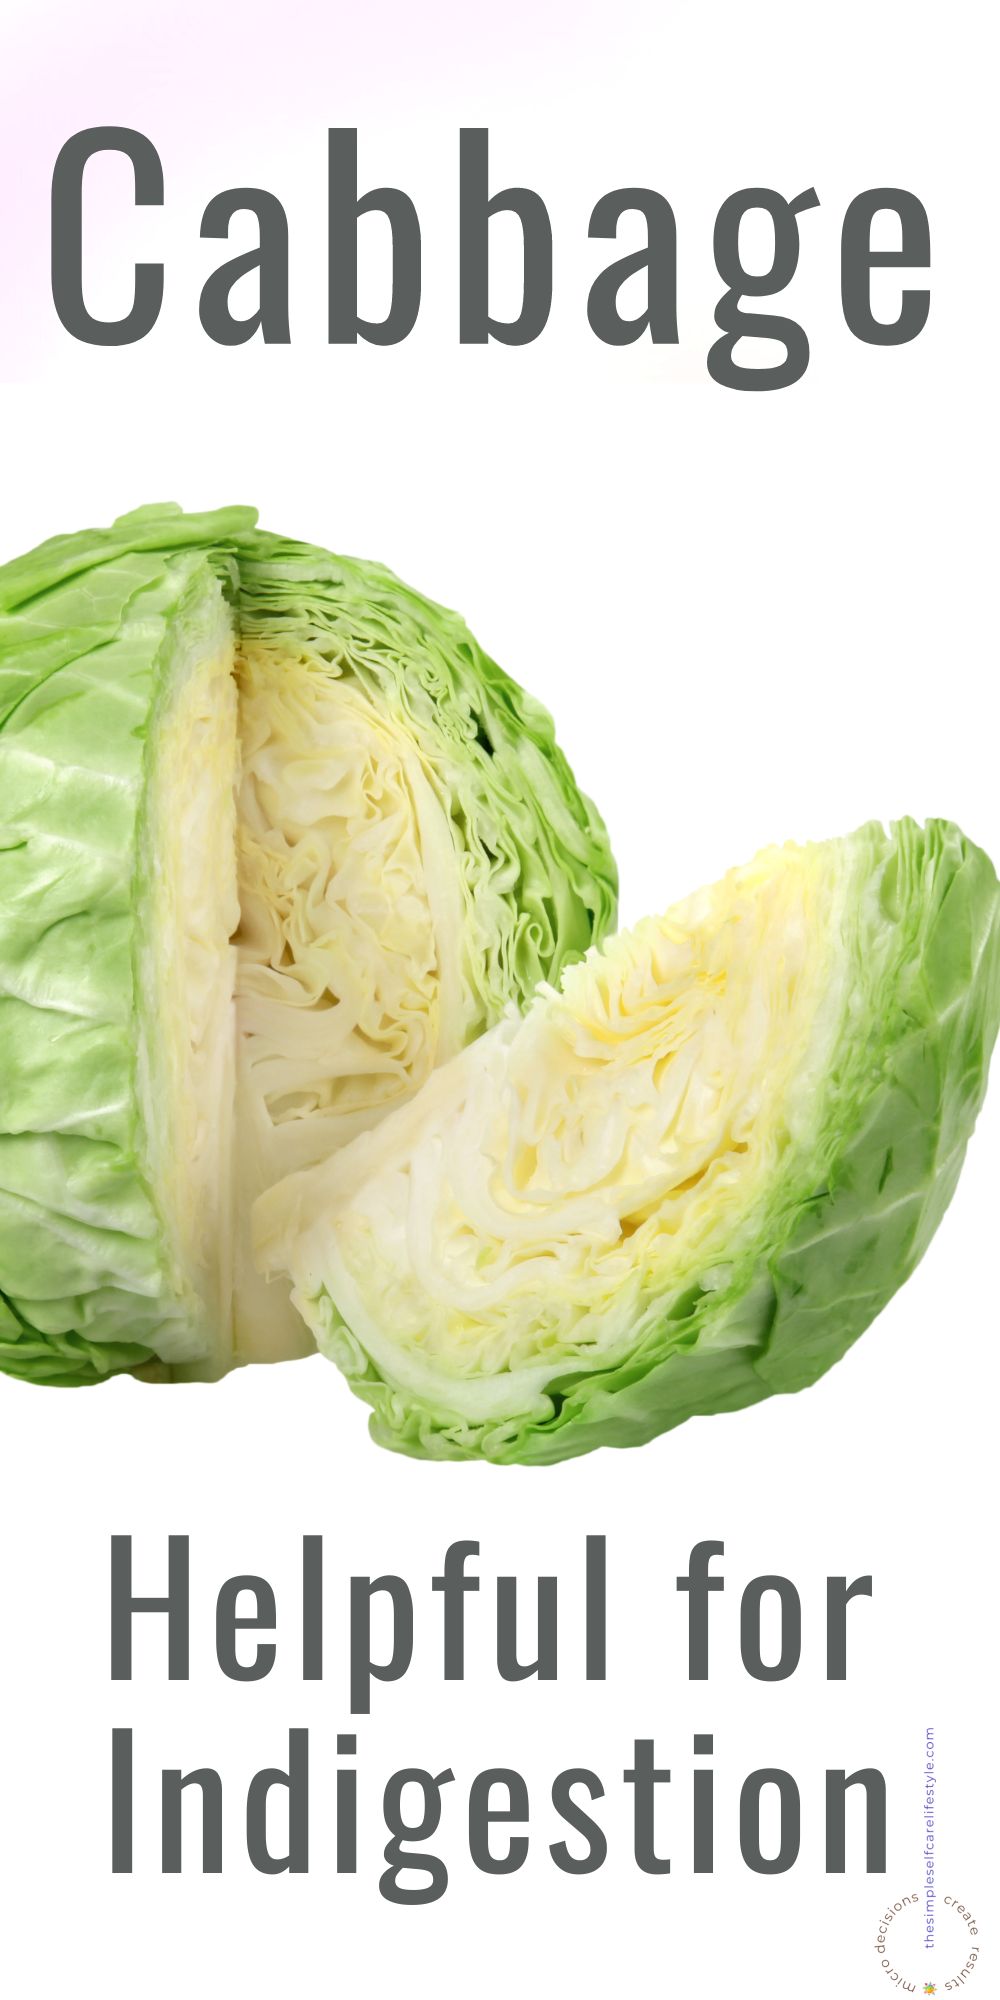 Cabbage is Helpful for Indigestion